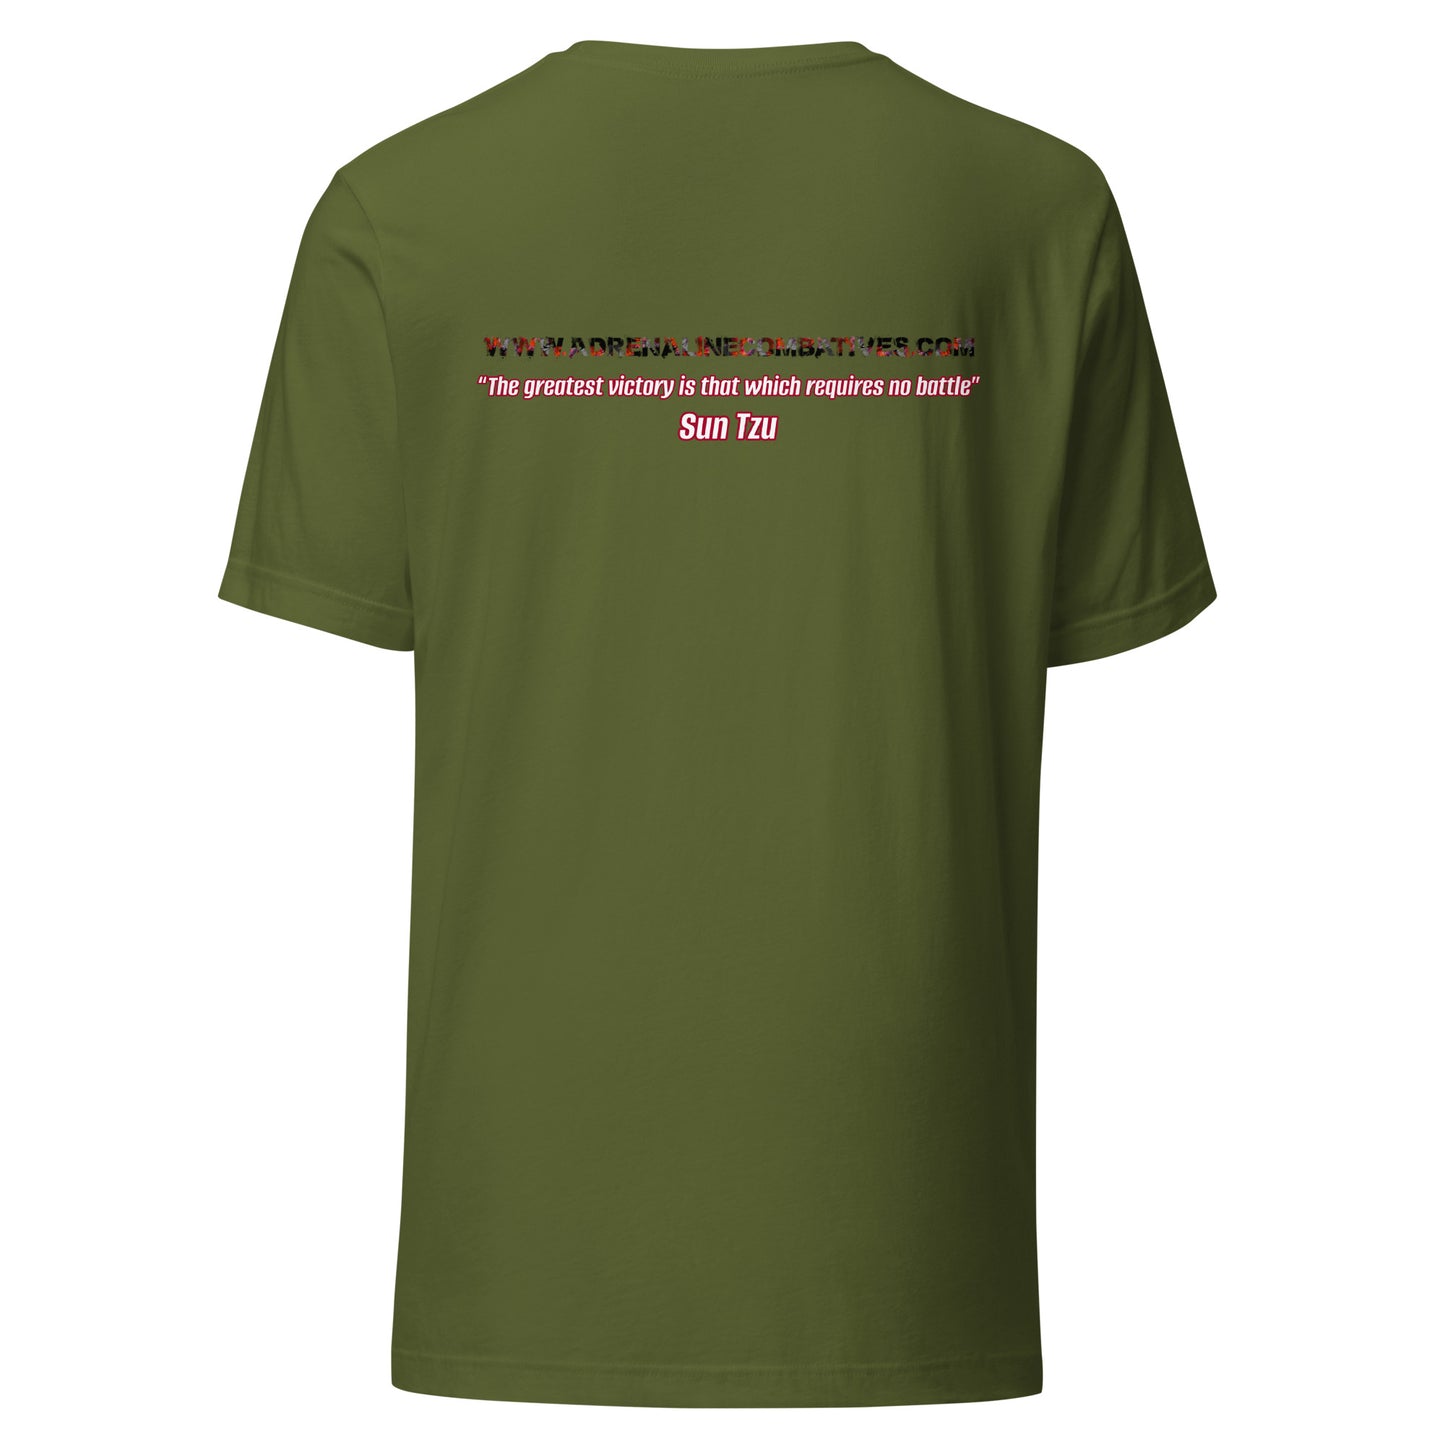 Unisex t-shirt - Adrenaline Combatives - Sun Tzu Quote: “The greatest victory is that which requires no battle”